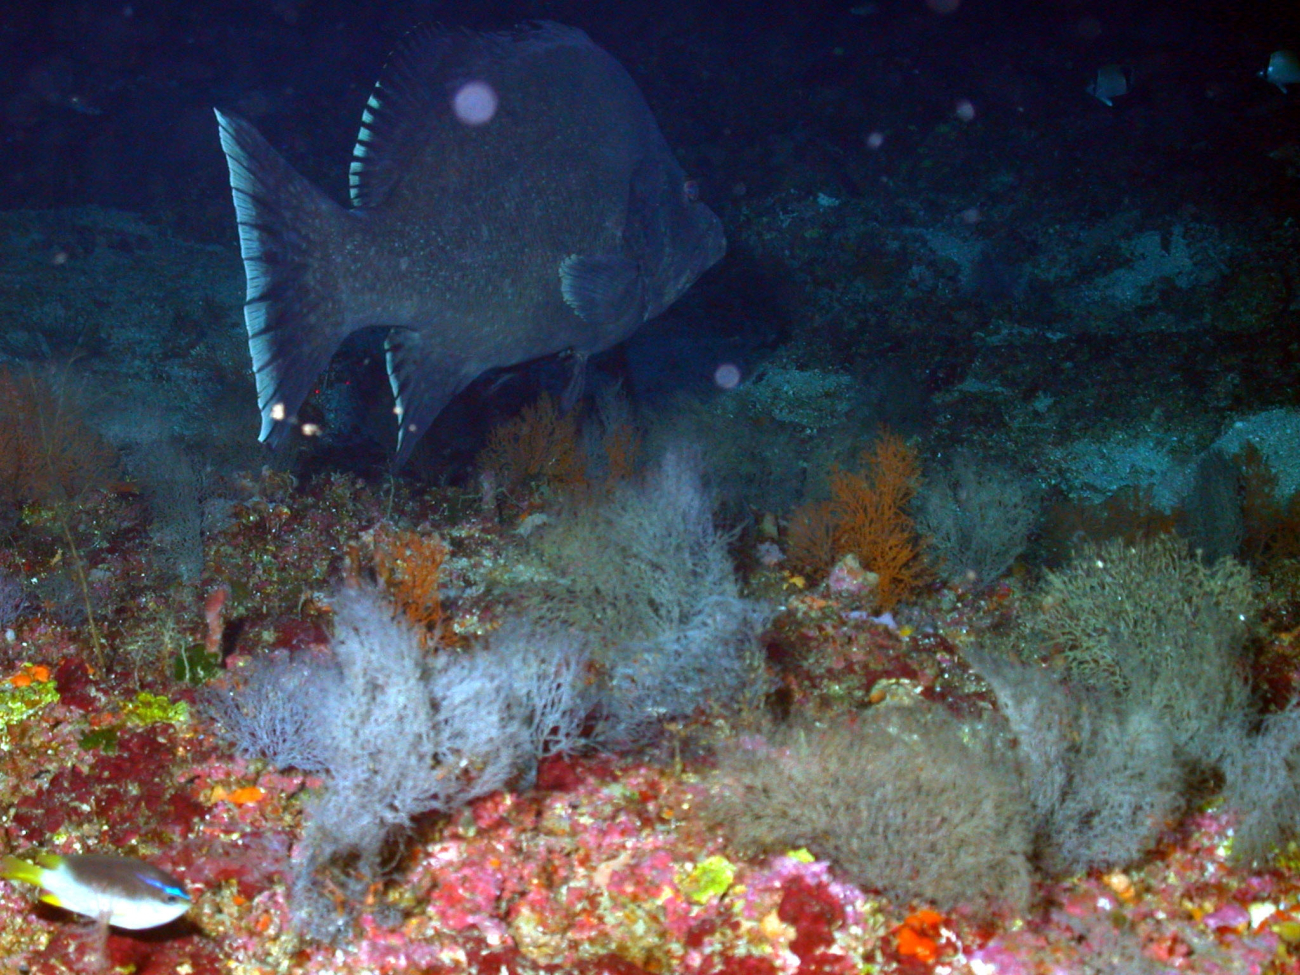 A marble grouper